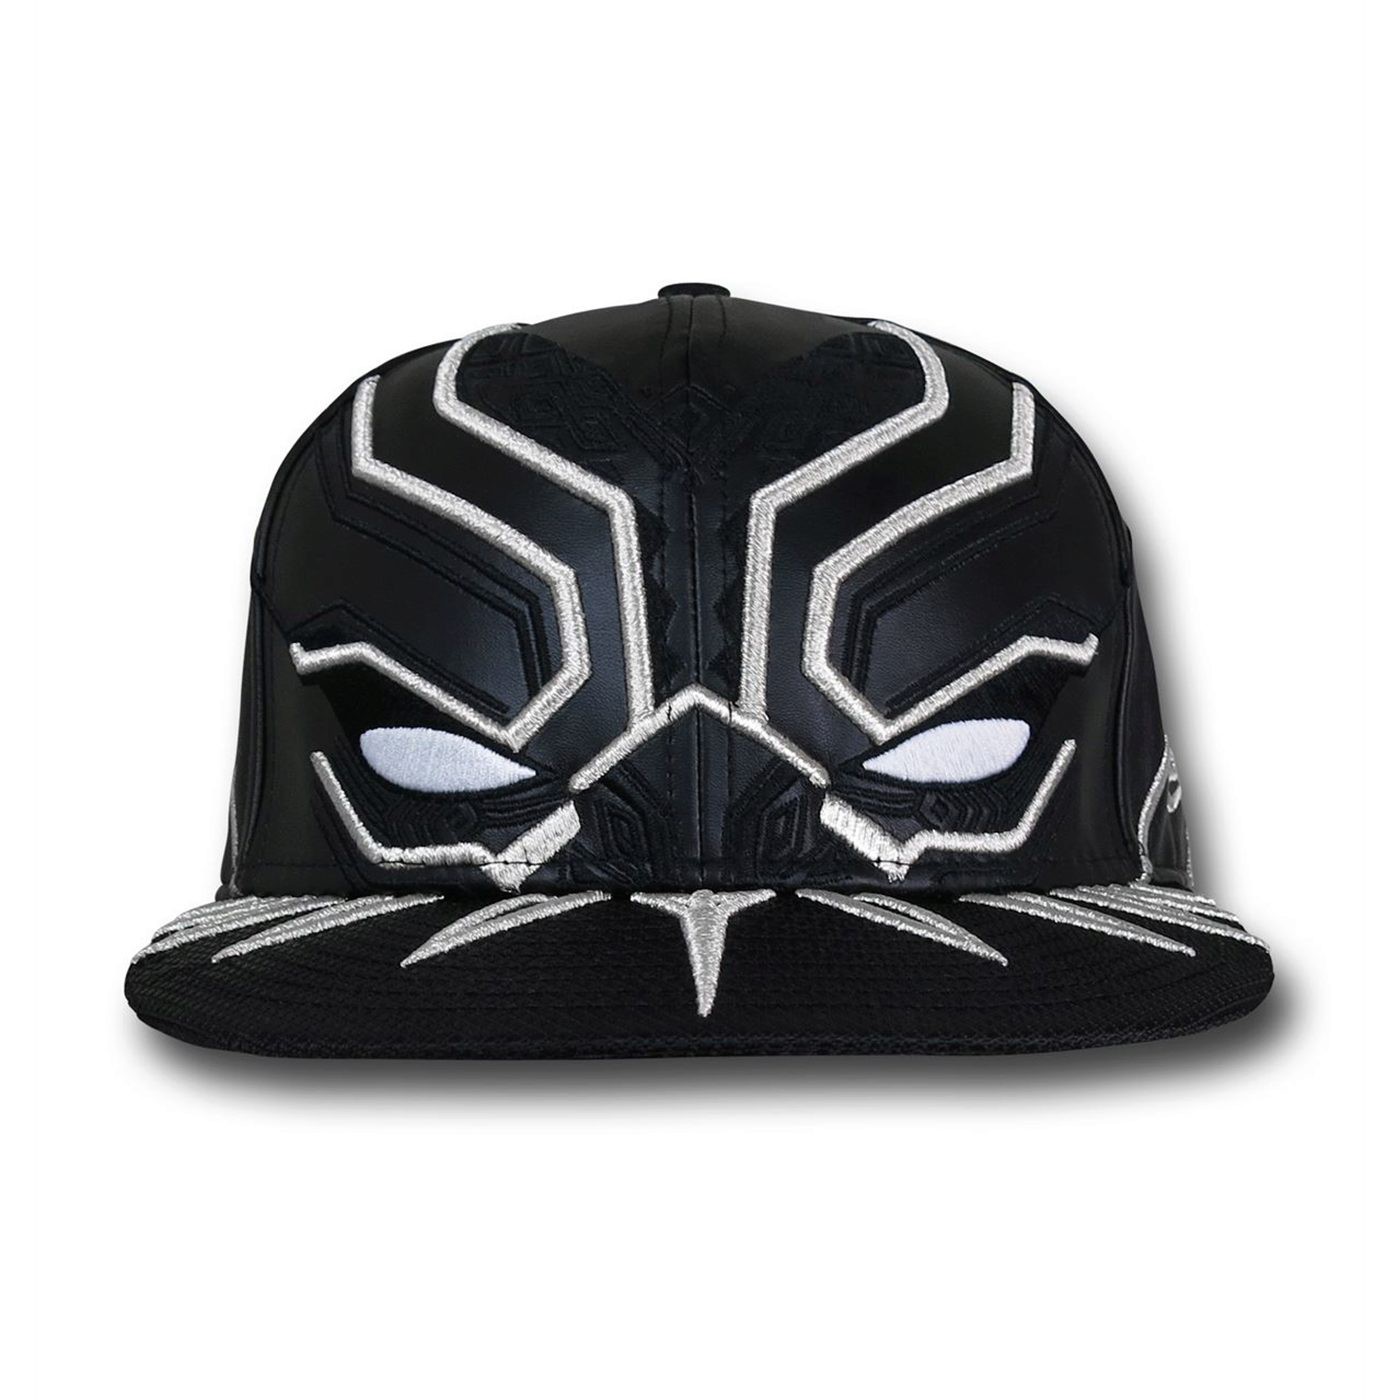 Black Panther Armor New Era 59Fifty Fitted Hat